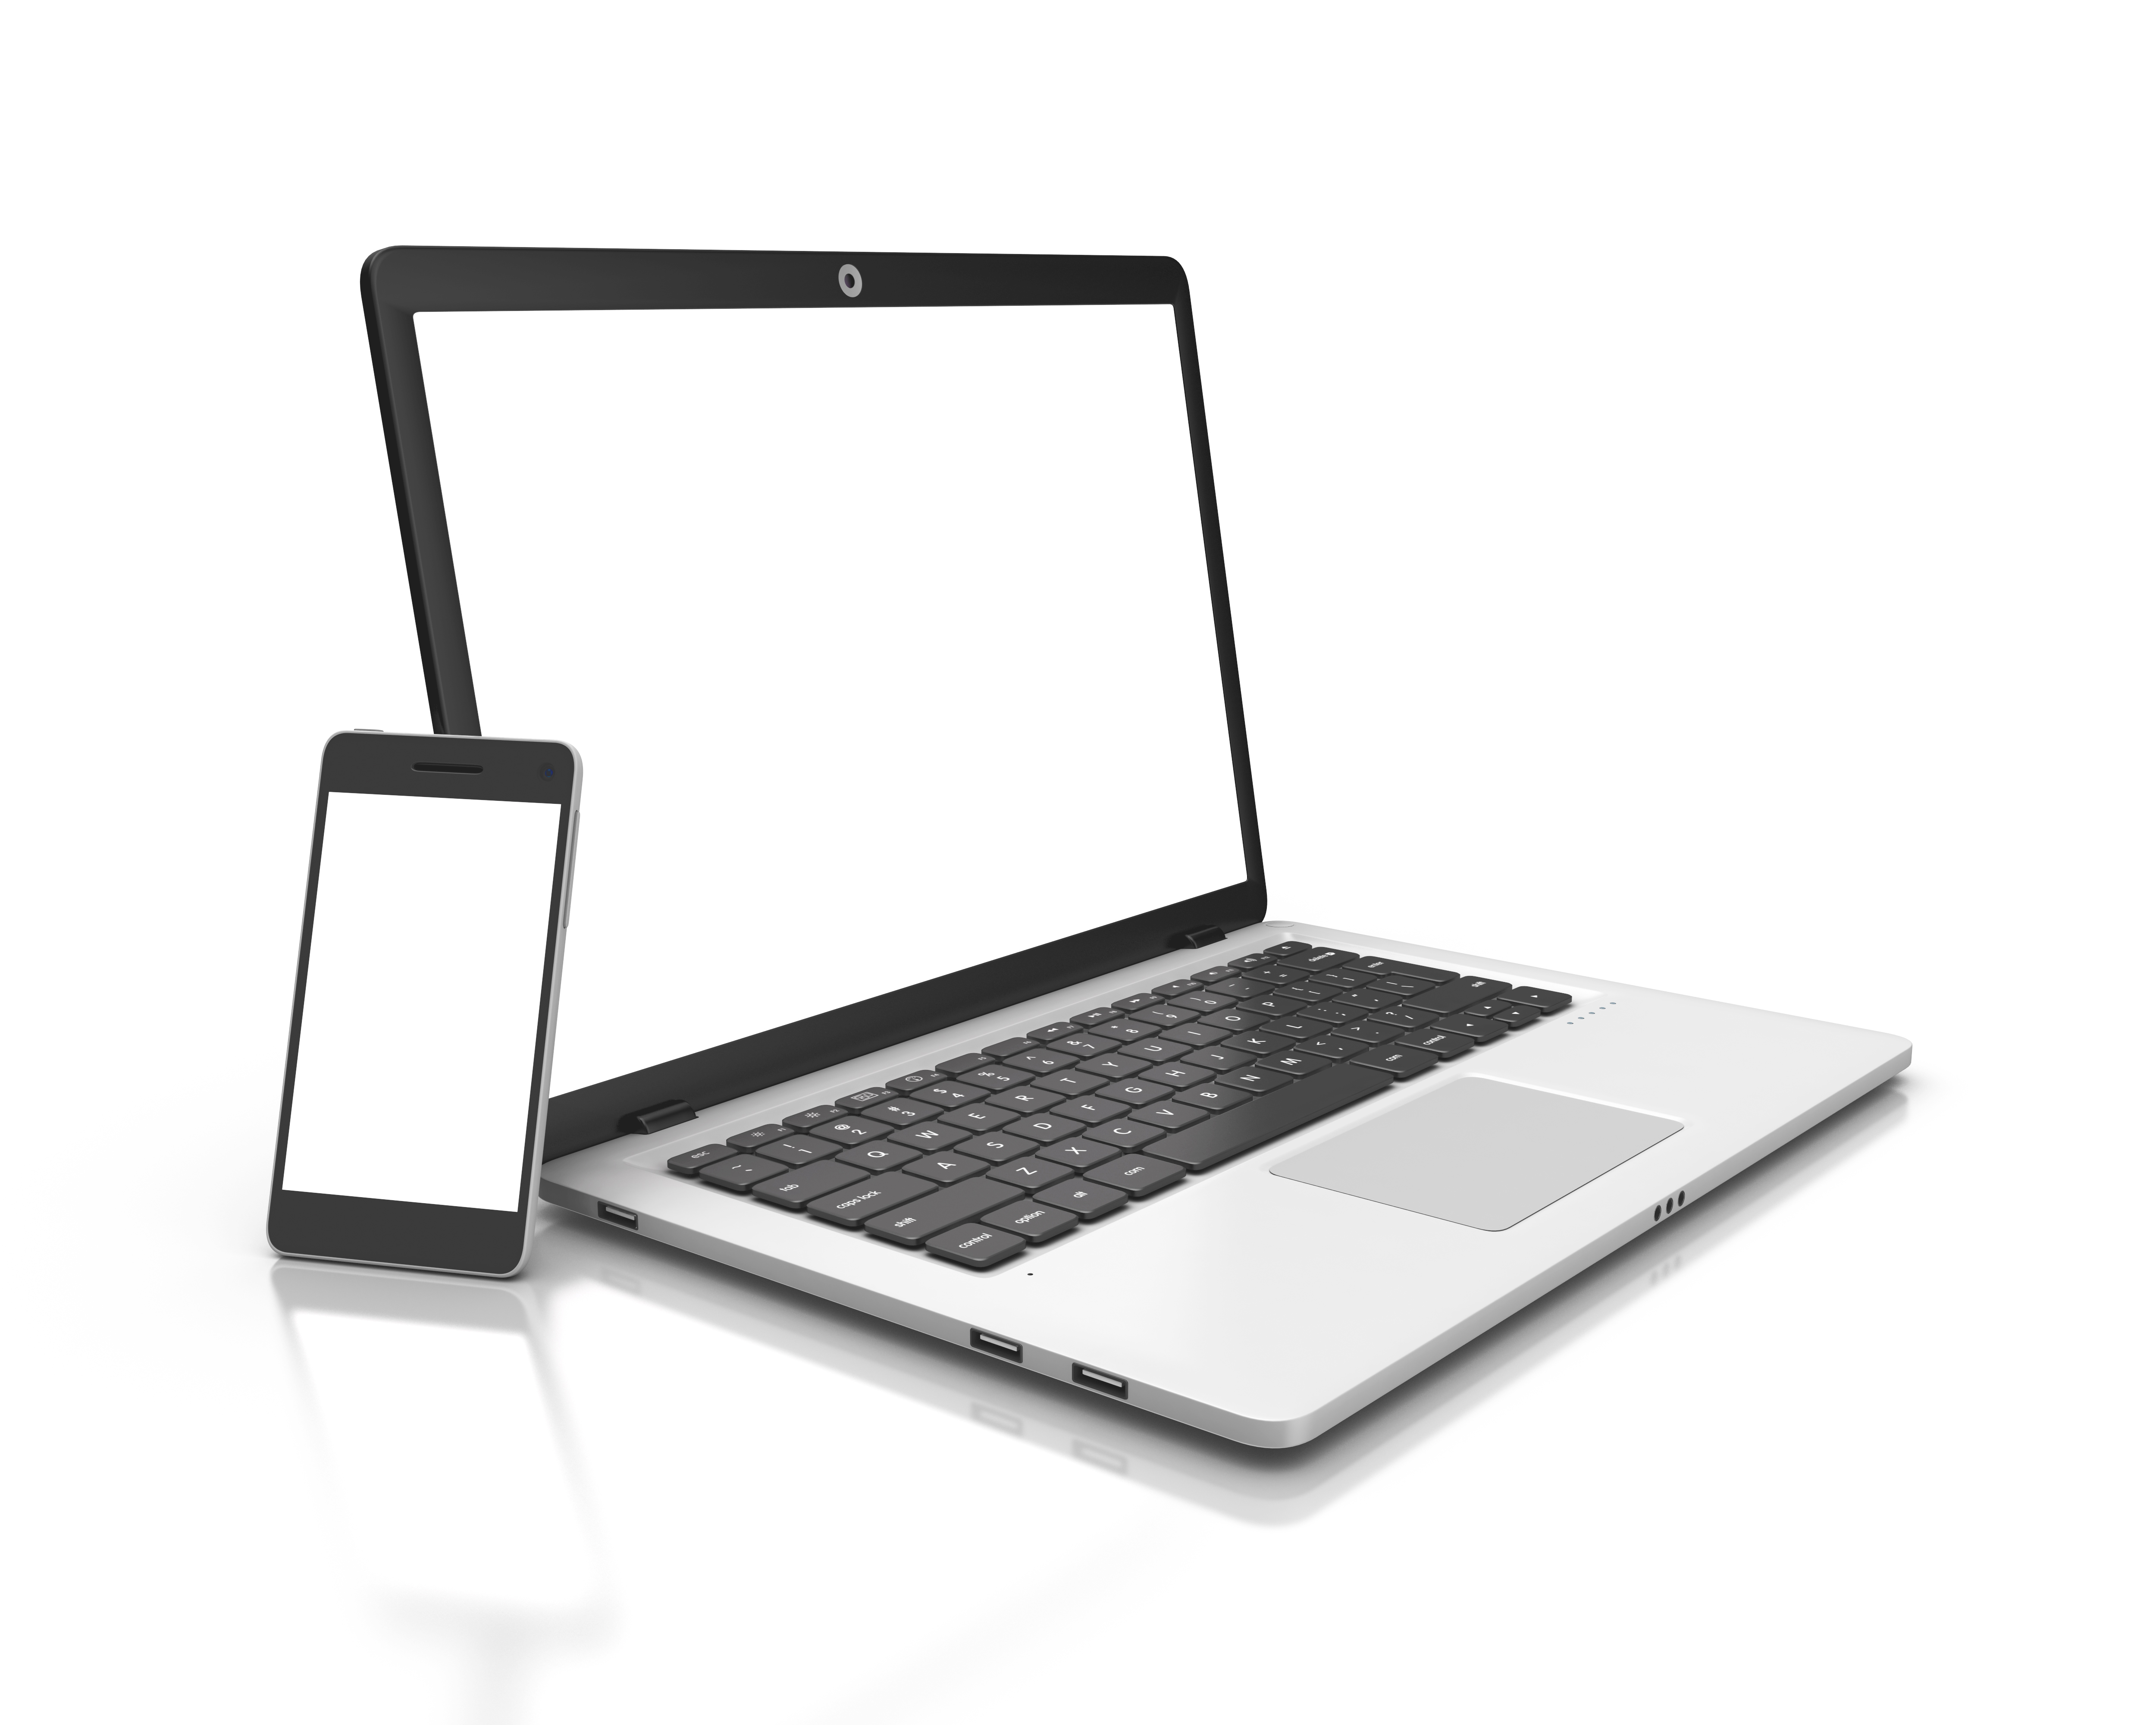 Modern Laptop and smartphone isolated on white.